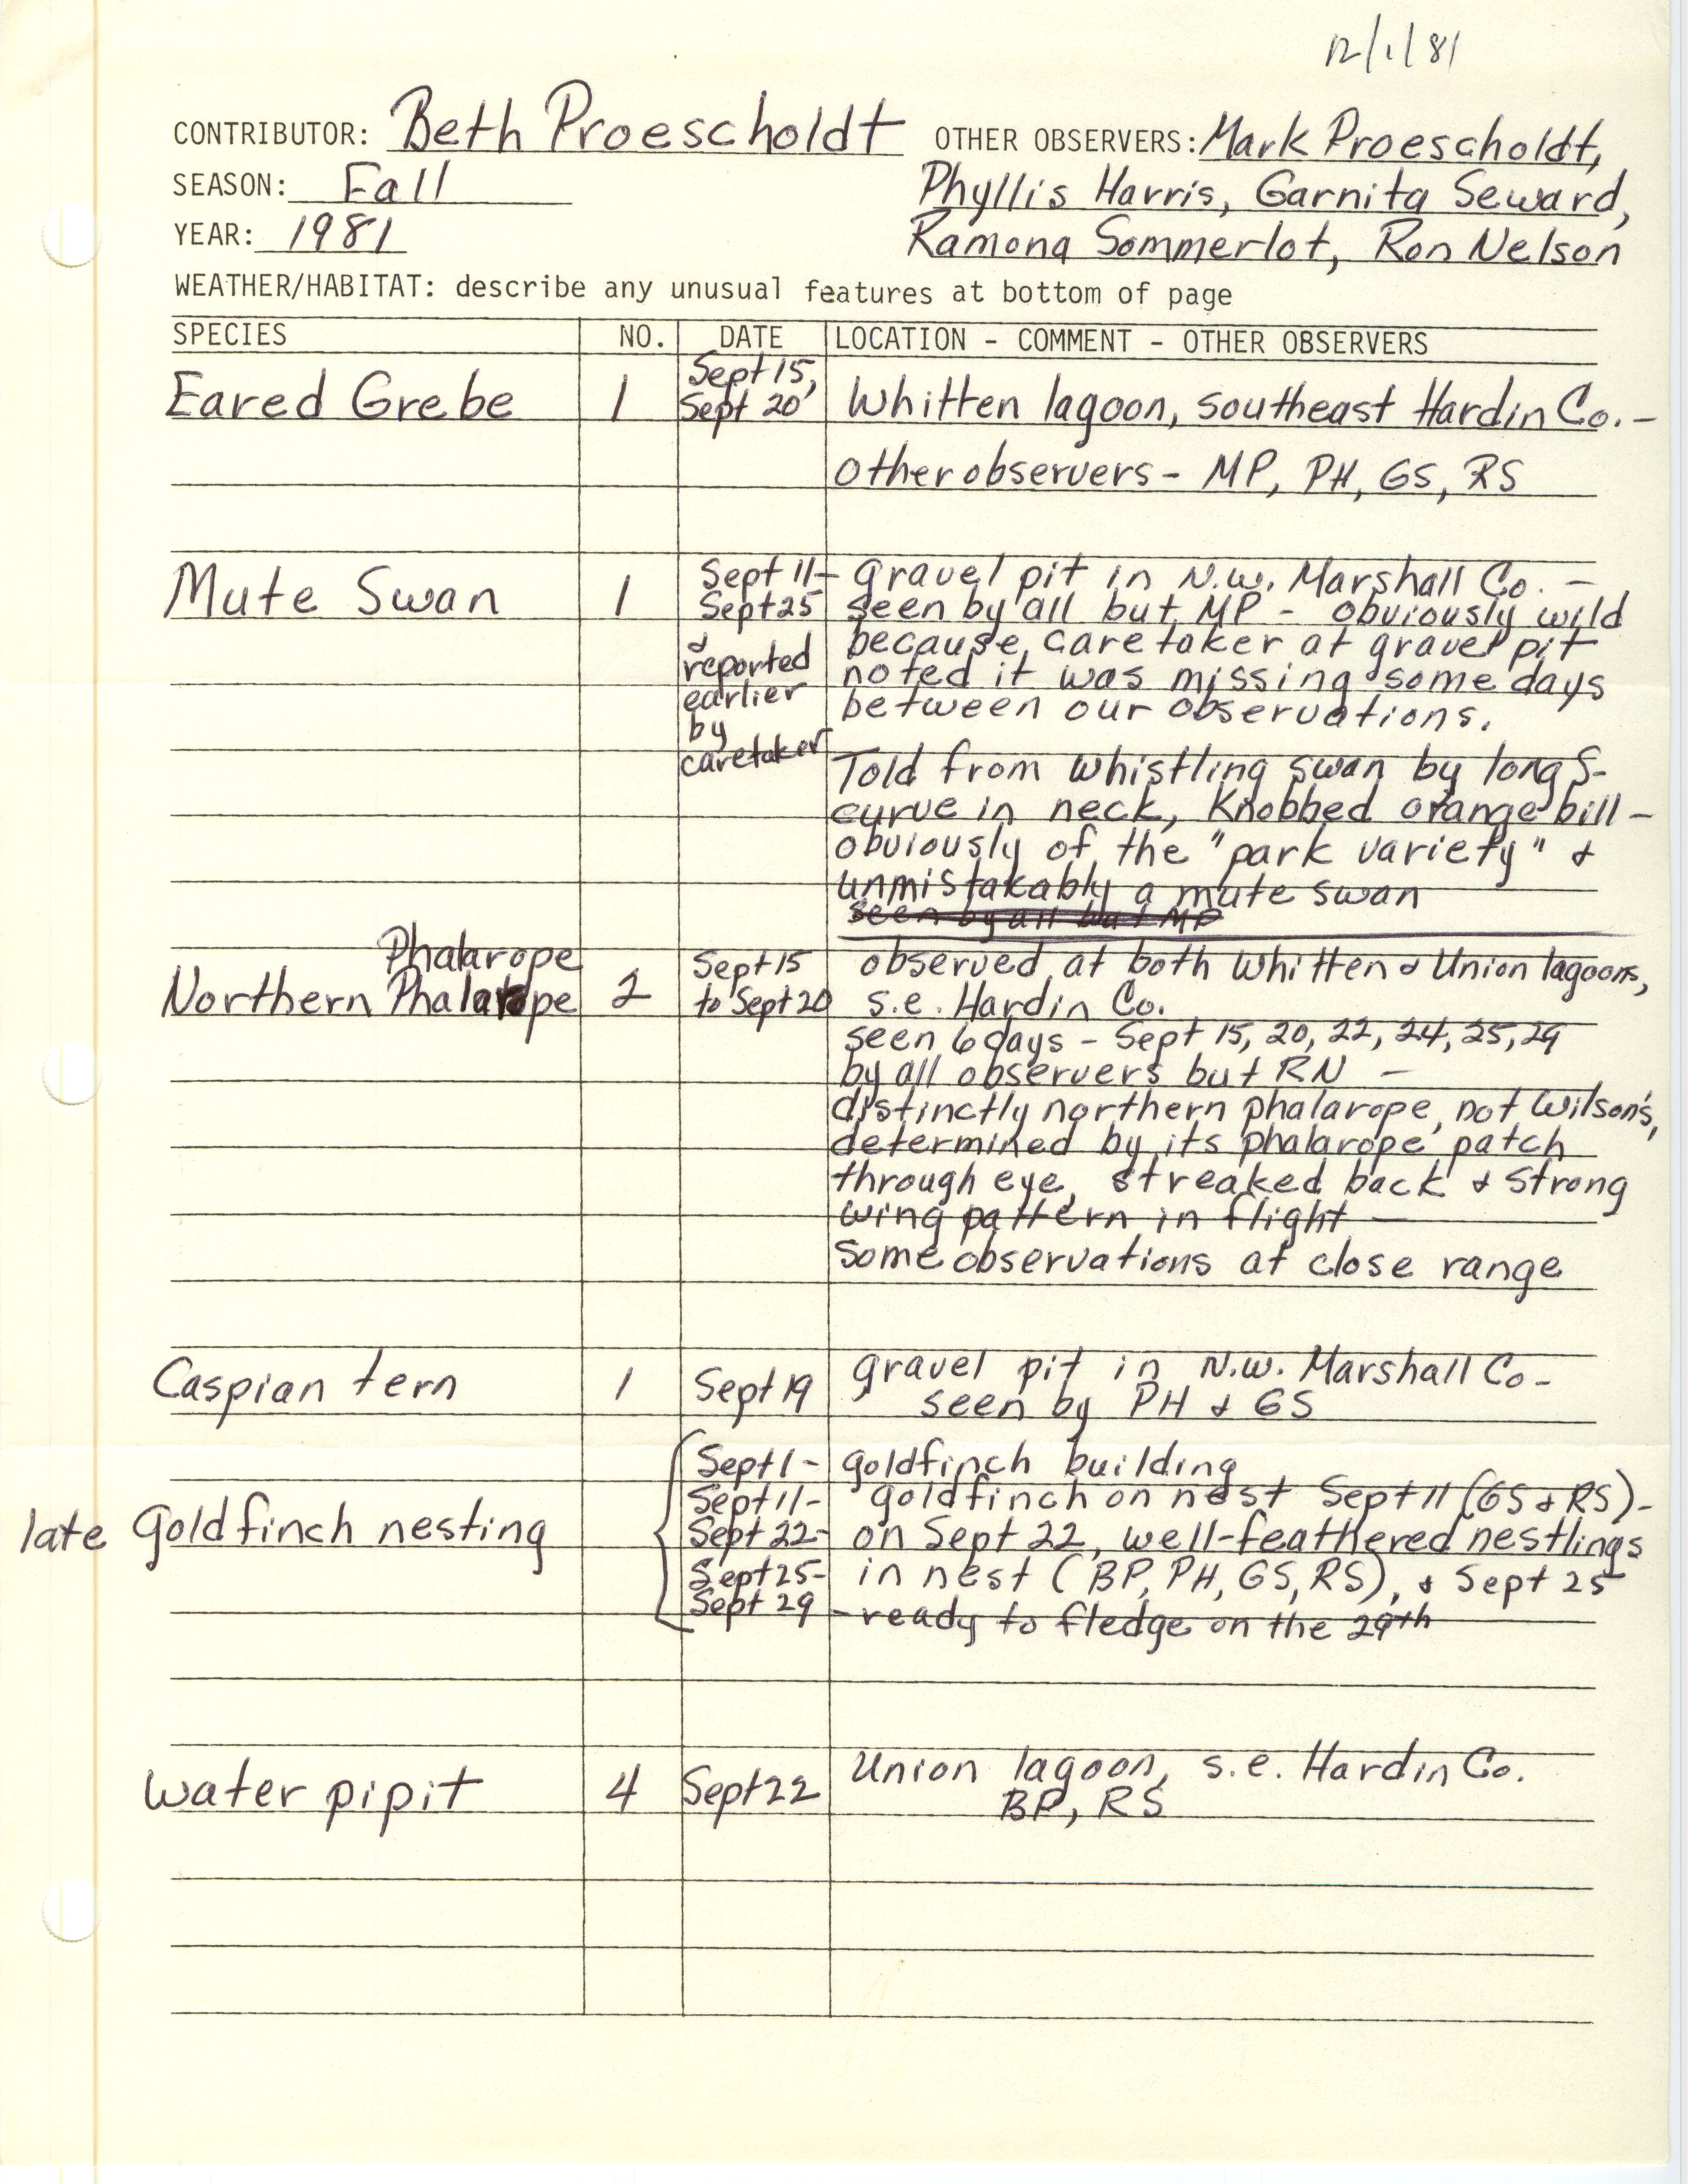 Field notes contributed by Beth Proescholdt, December 1, 1981